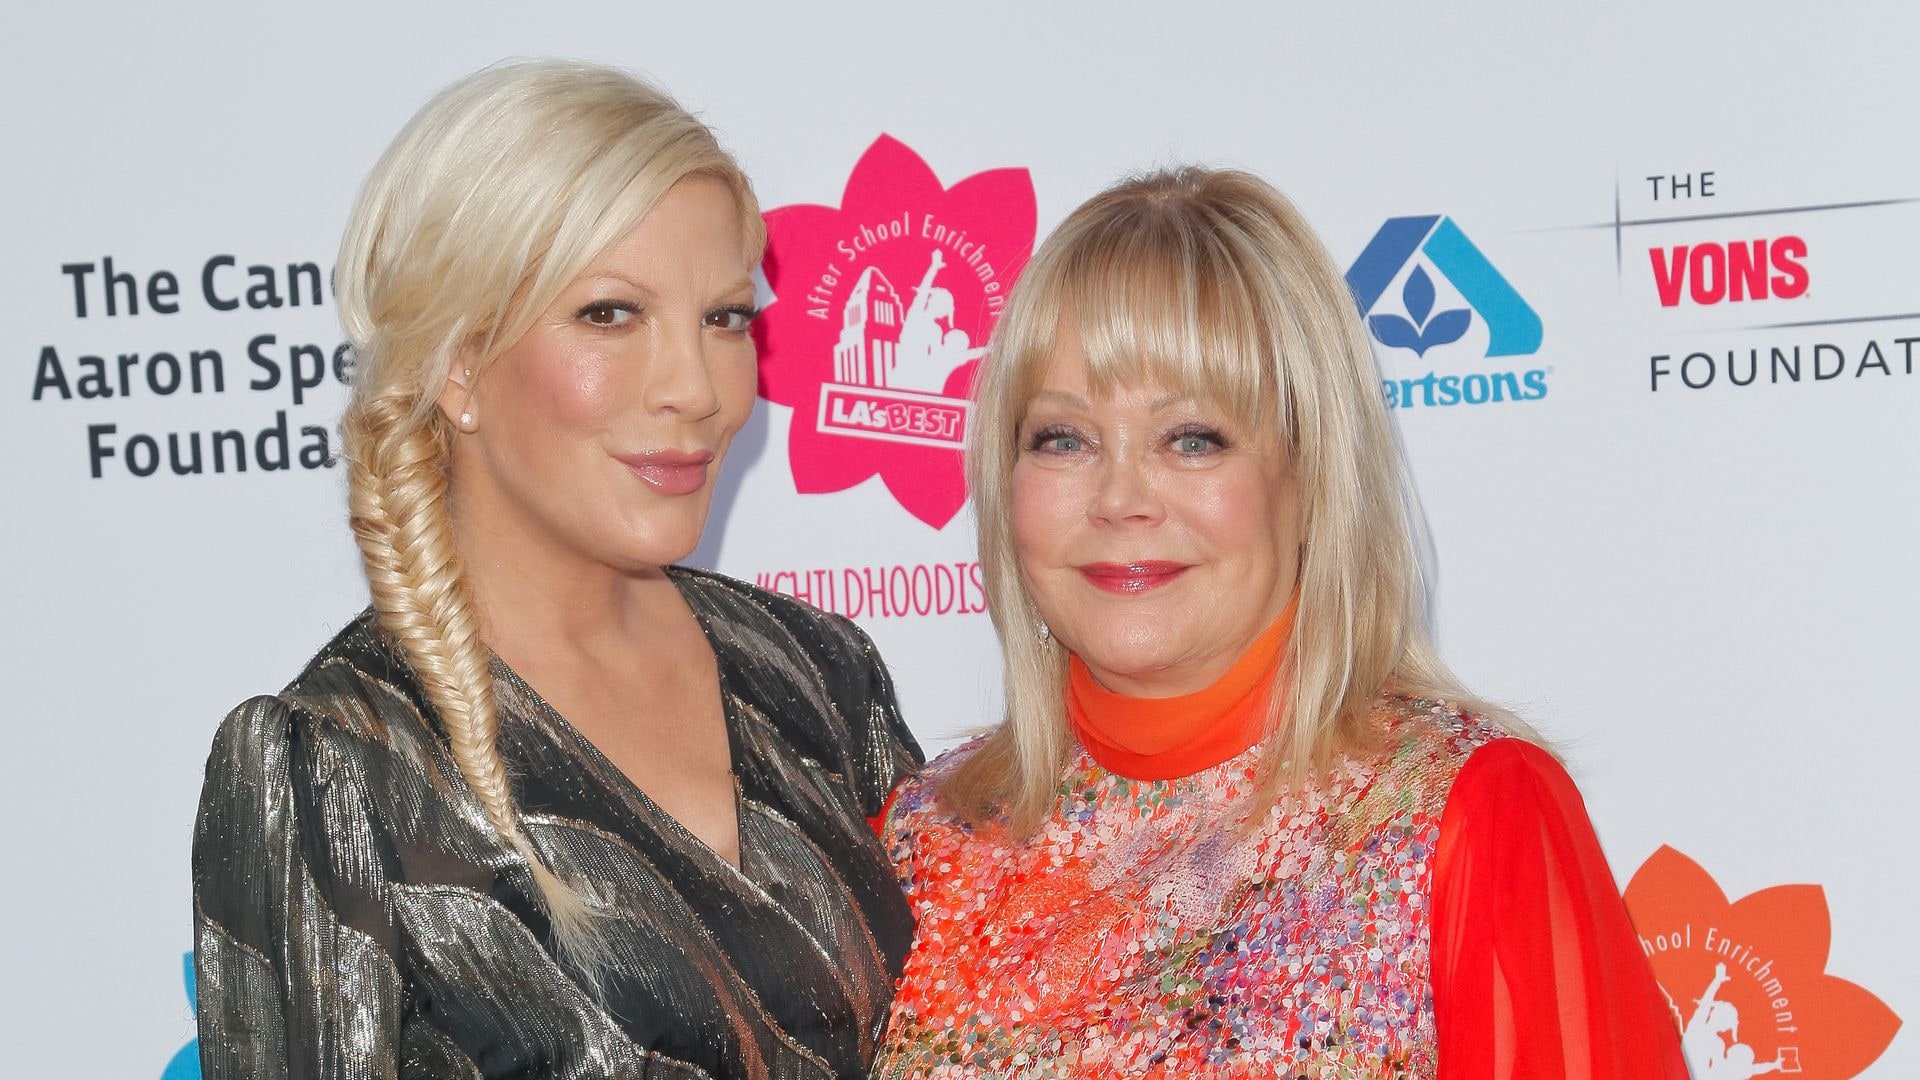 Tori Spelling's mom Candy addresses relationship with daughter after fans question her support of her amid divorce